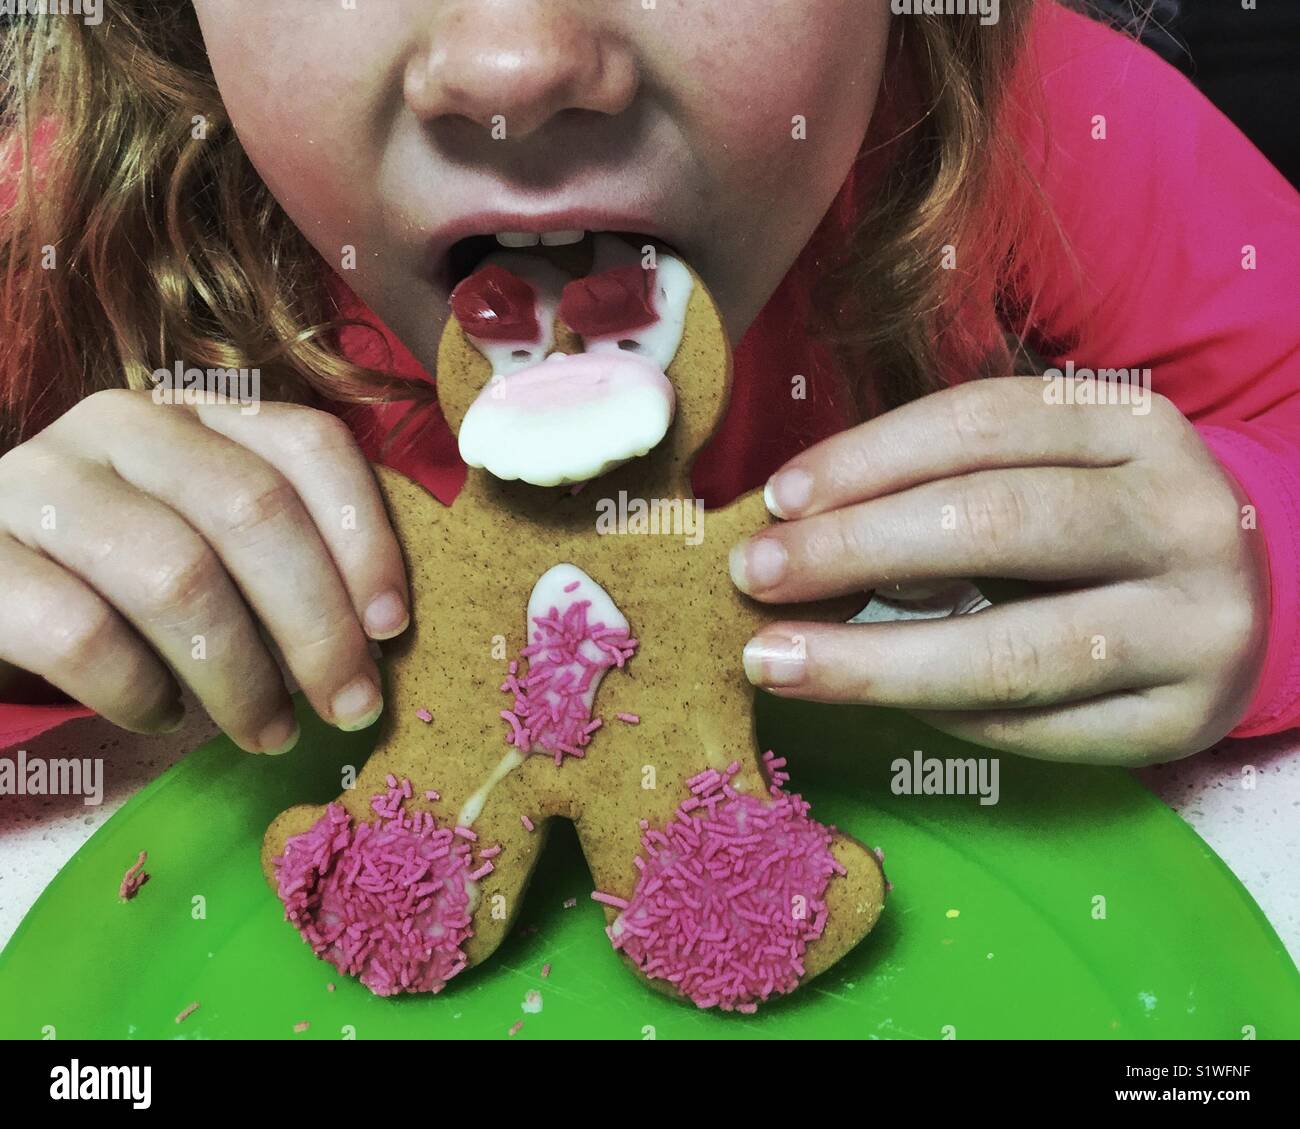 Young girl with long hair eating gingerbread man cookie. Festive moment as kid eats yummy cookie. Stock Photo